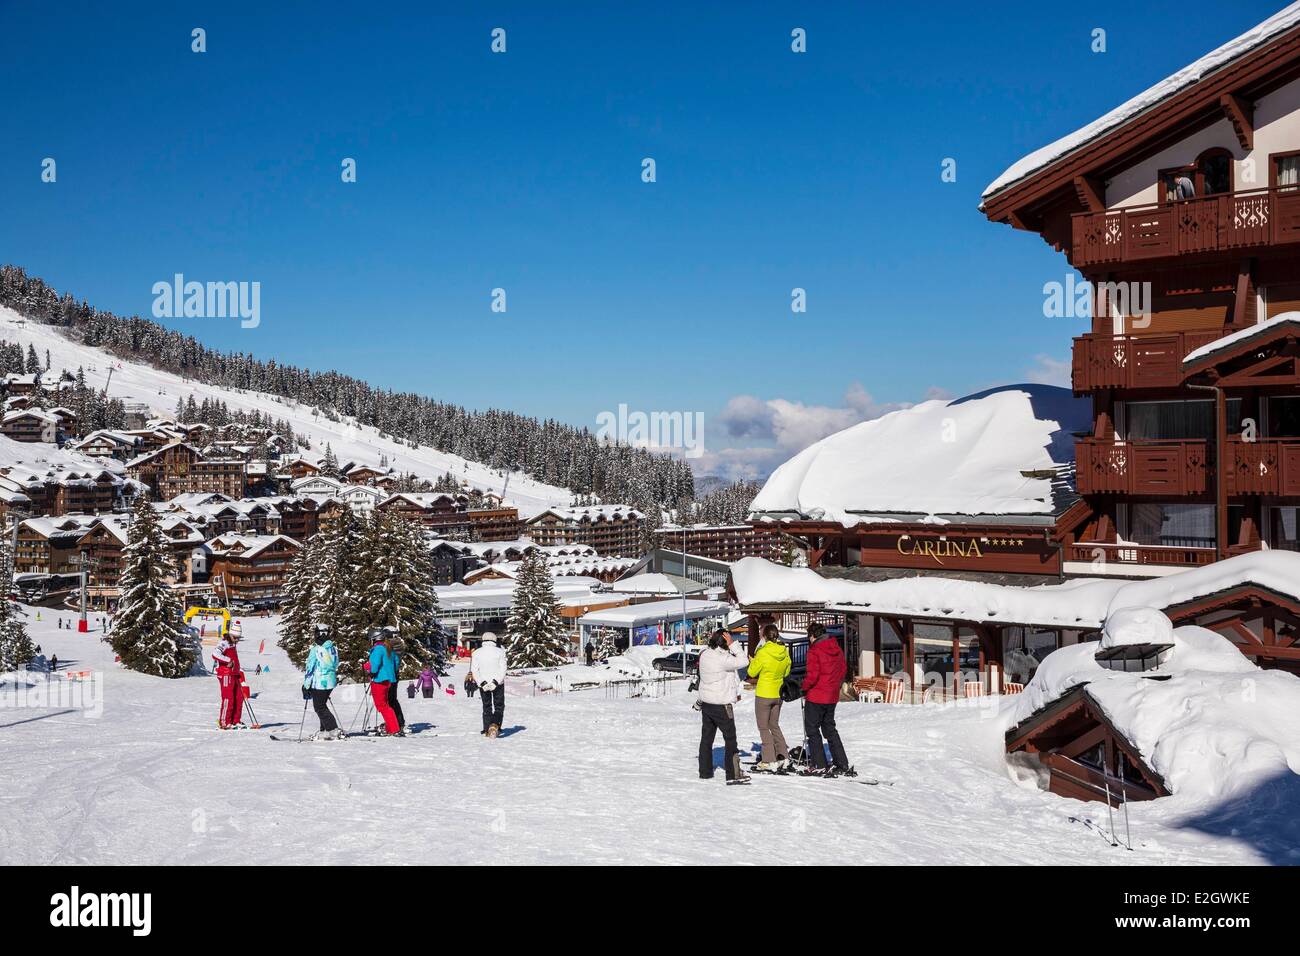 Ski Report: What to See/Do/Wear in Courchevel, Sun Valley, and Whistler